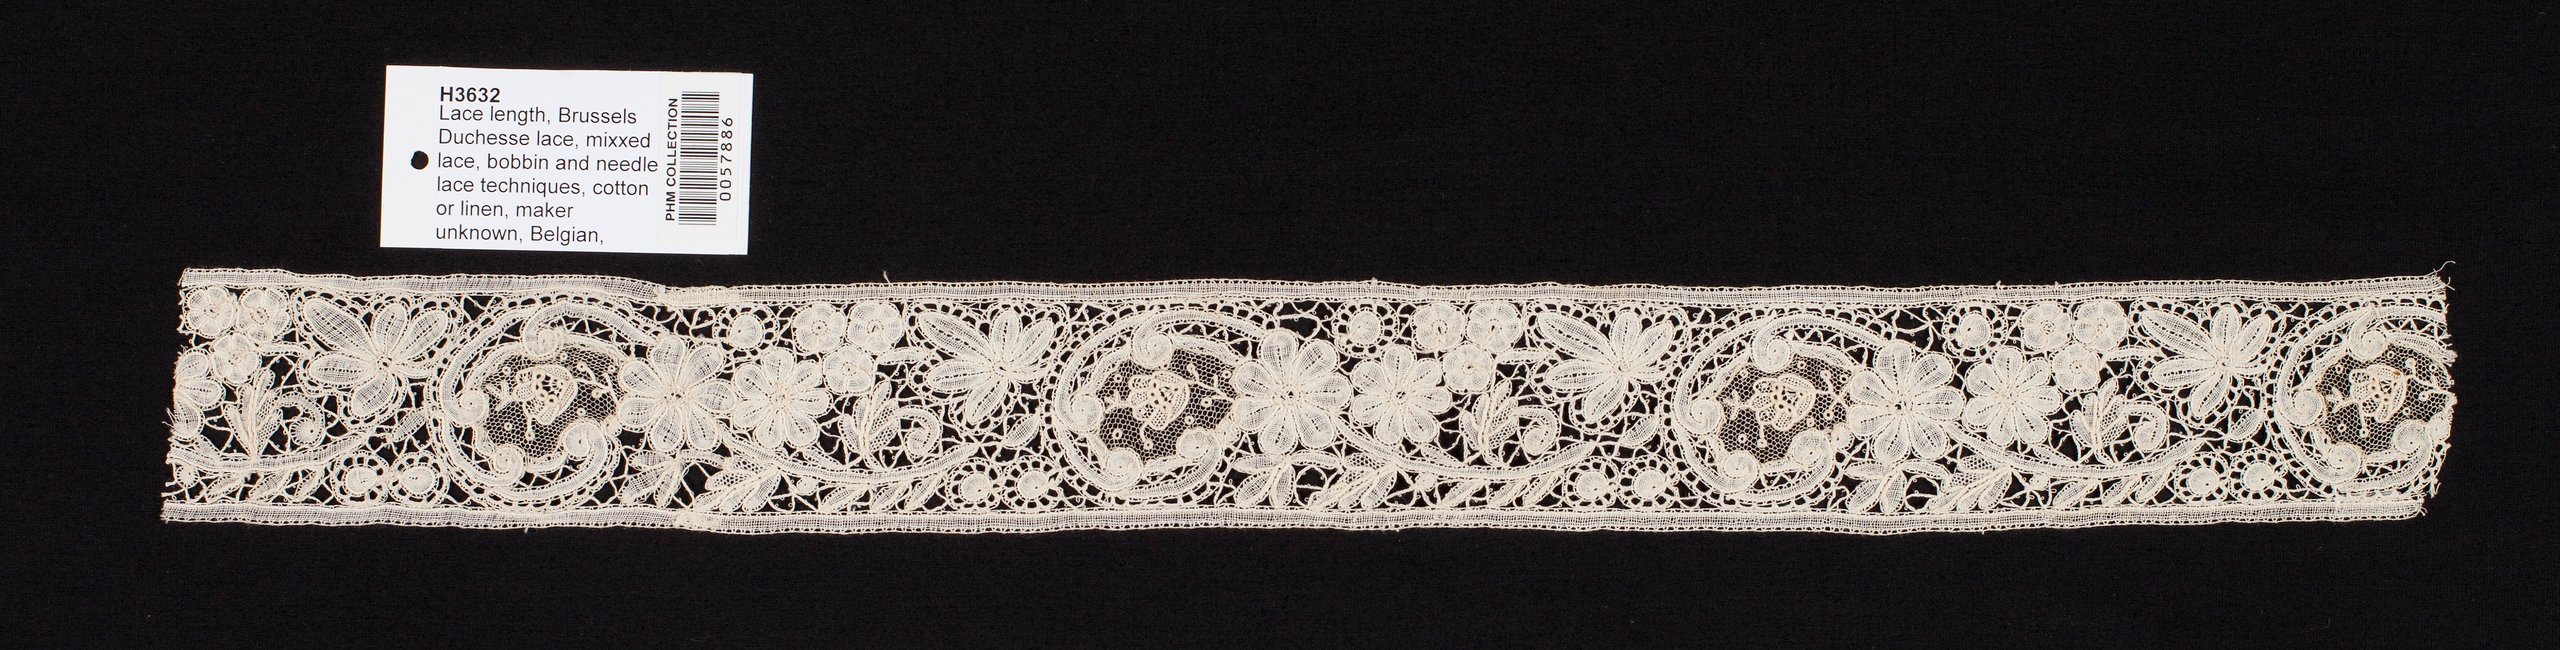 Brussels Duchesse lace length